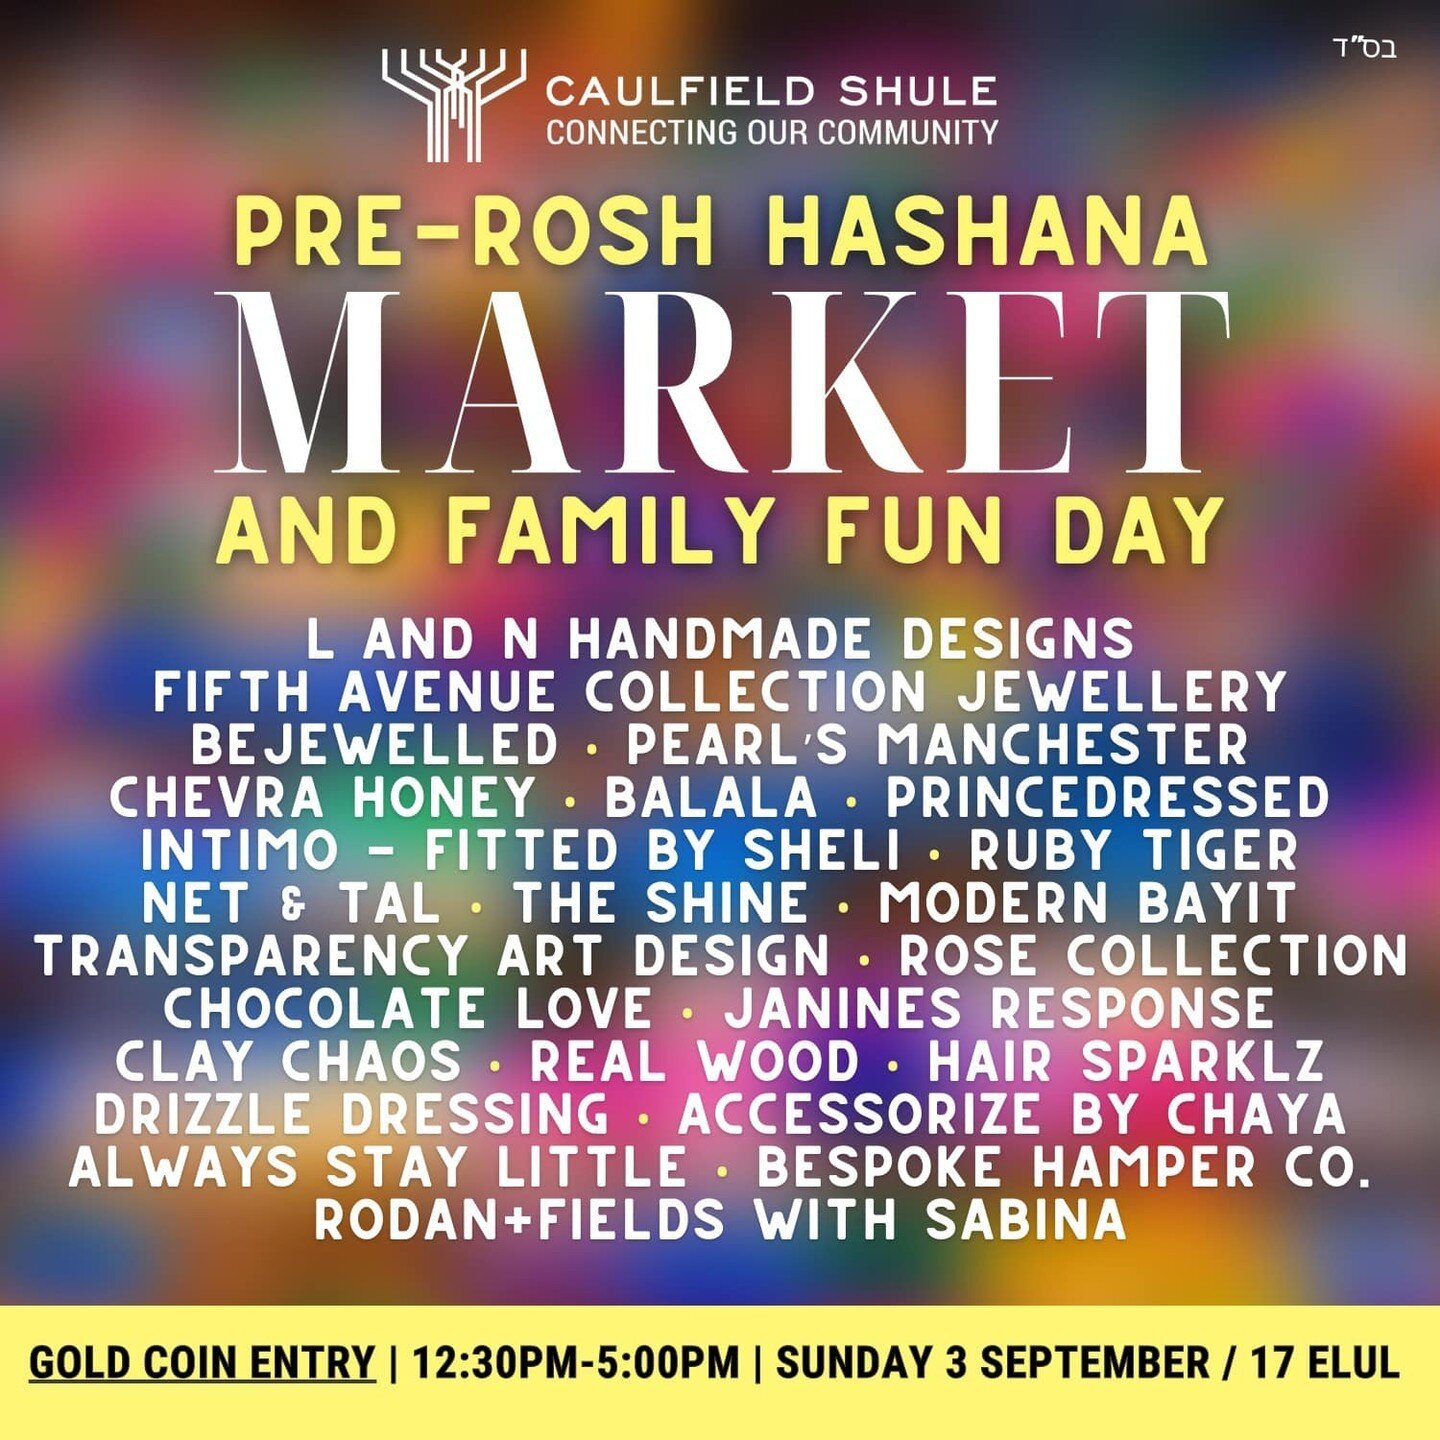 Join us at the Pre-Rosh Hashanah Market and Family Fun Day &ndash; a celebration of community, culture, and creativity! 🍎🍯⁠
⁠
I can't wait to share my latest creations with you all at the event! From Rosh Hashanah Gifts to our NEW Jewellery Collect